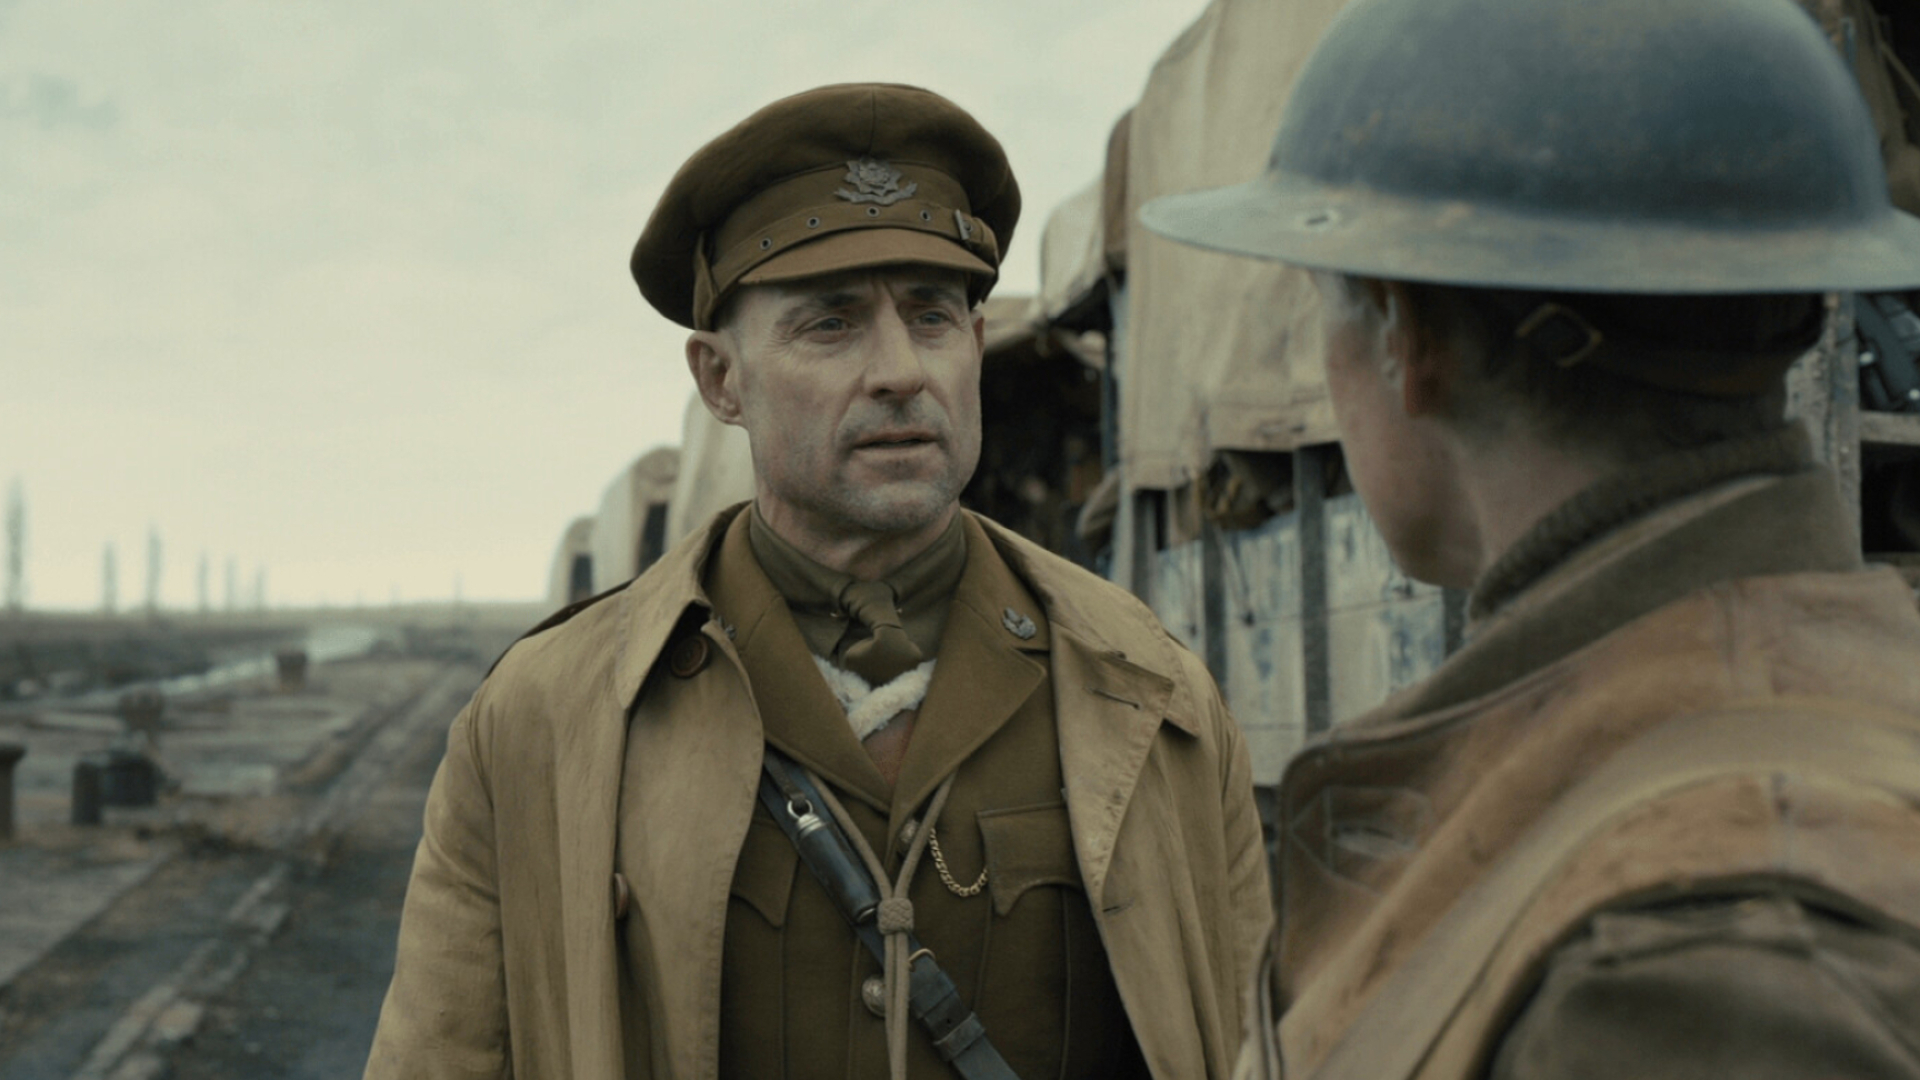 1917 (Movie): Mark Strong as Captain Smith, The film received three nominations at the 77th Golden Globe Awards. 1920x1080 Full HD Wallpaper.